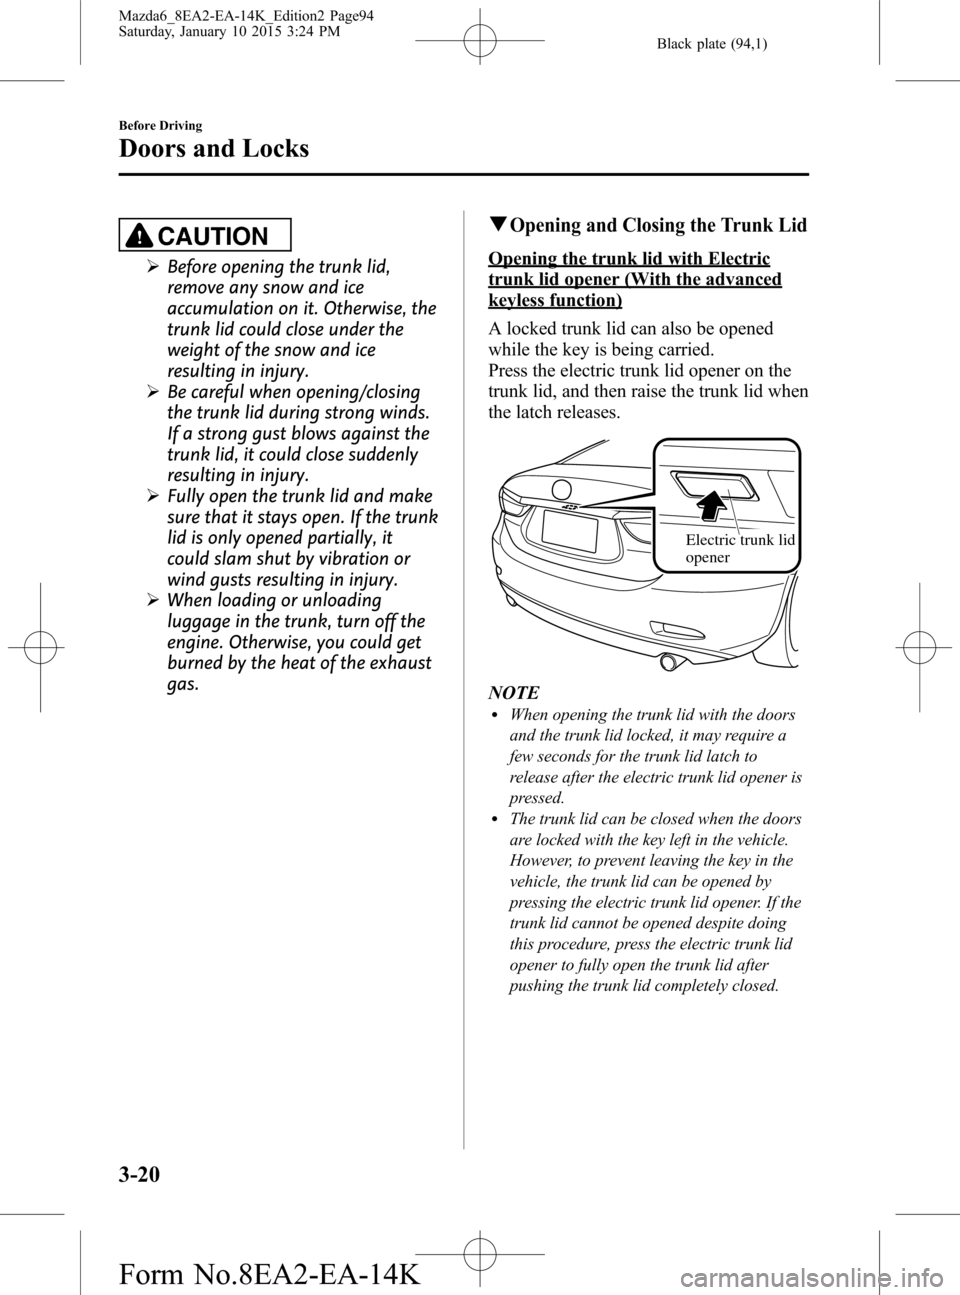 MAZDA MODEL 6 2016  Owners Manual (in English) Black plate (94,1)
CAUTION
ØBefore opening the trunk lid,
remove any snow and ice
accumulation on it. Otherwise, the
trunk lid could close under the
weight of the snow and ice
resulting in injury.
Ø